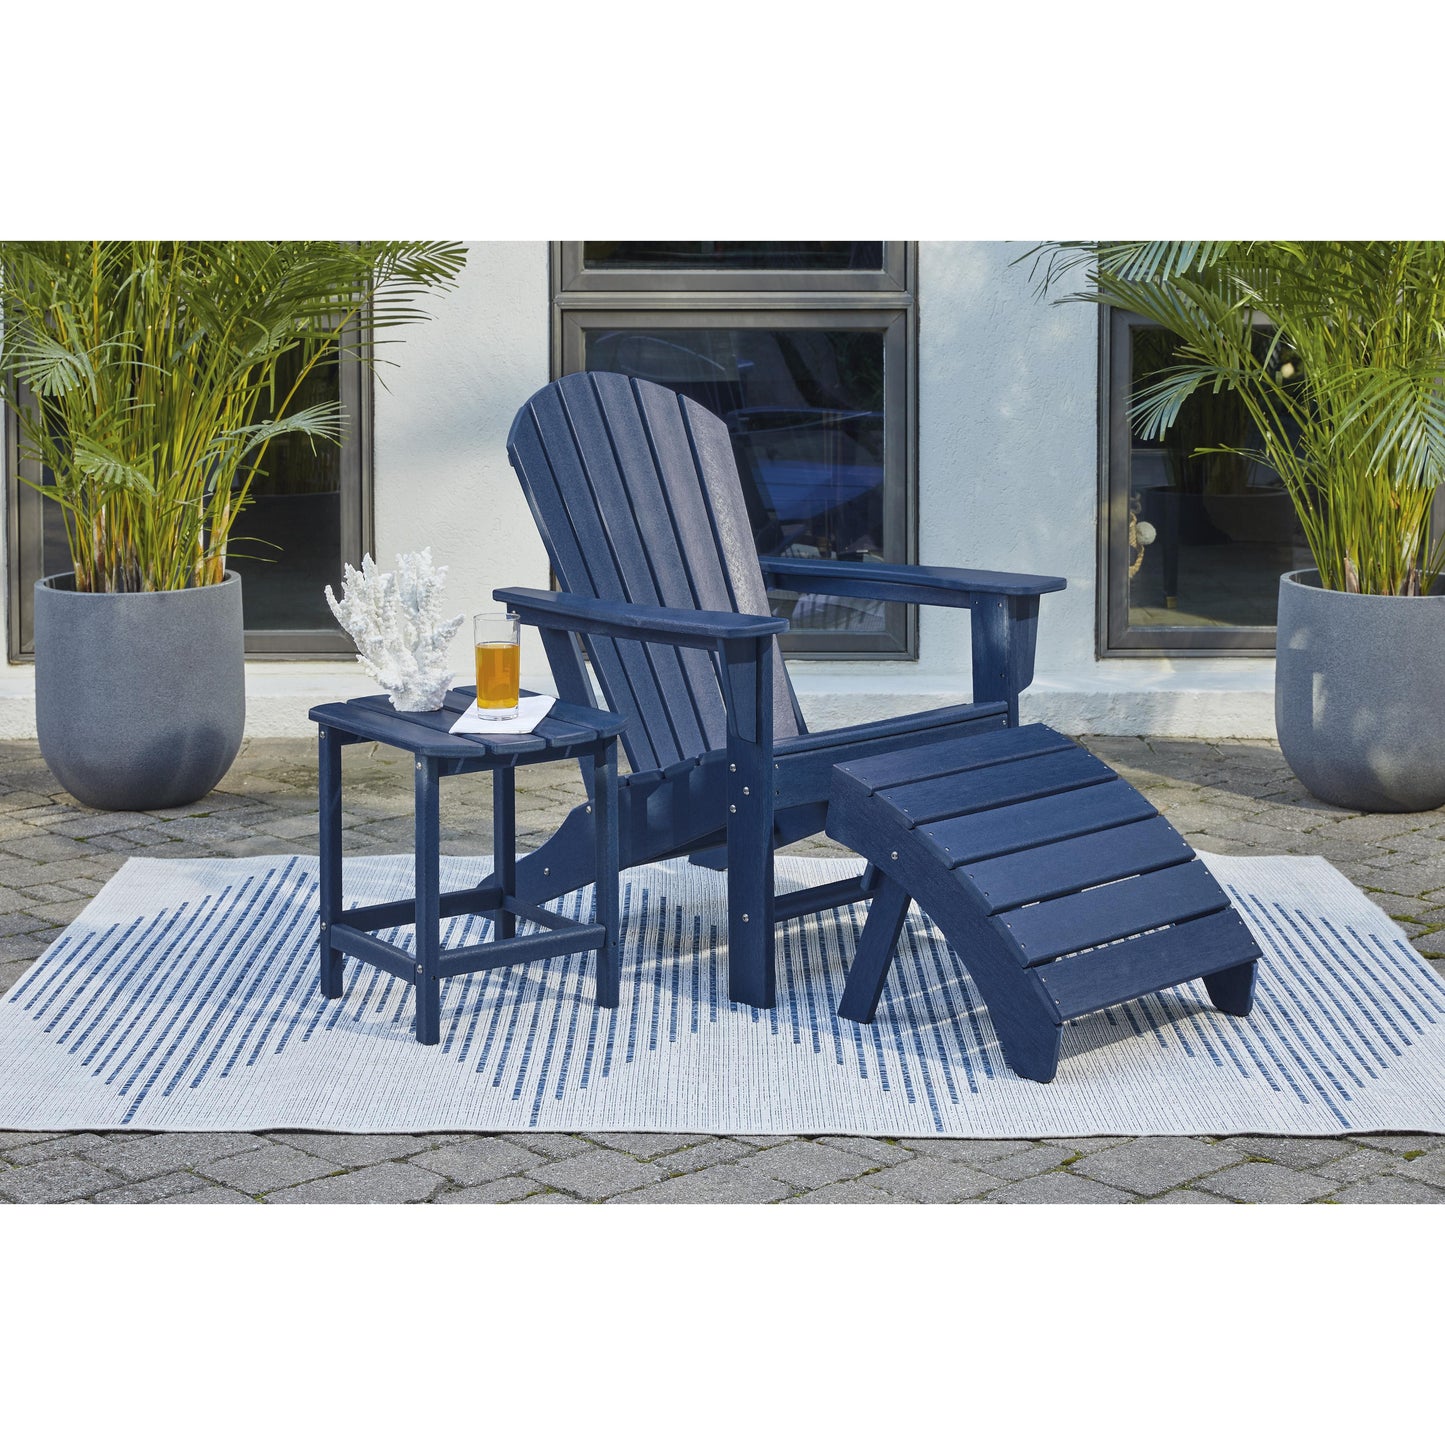 Signature Design by Ashley Outdoor Seating Adirondack Chairs P009-898 IMAGE 11